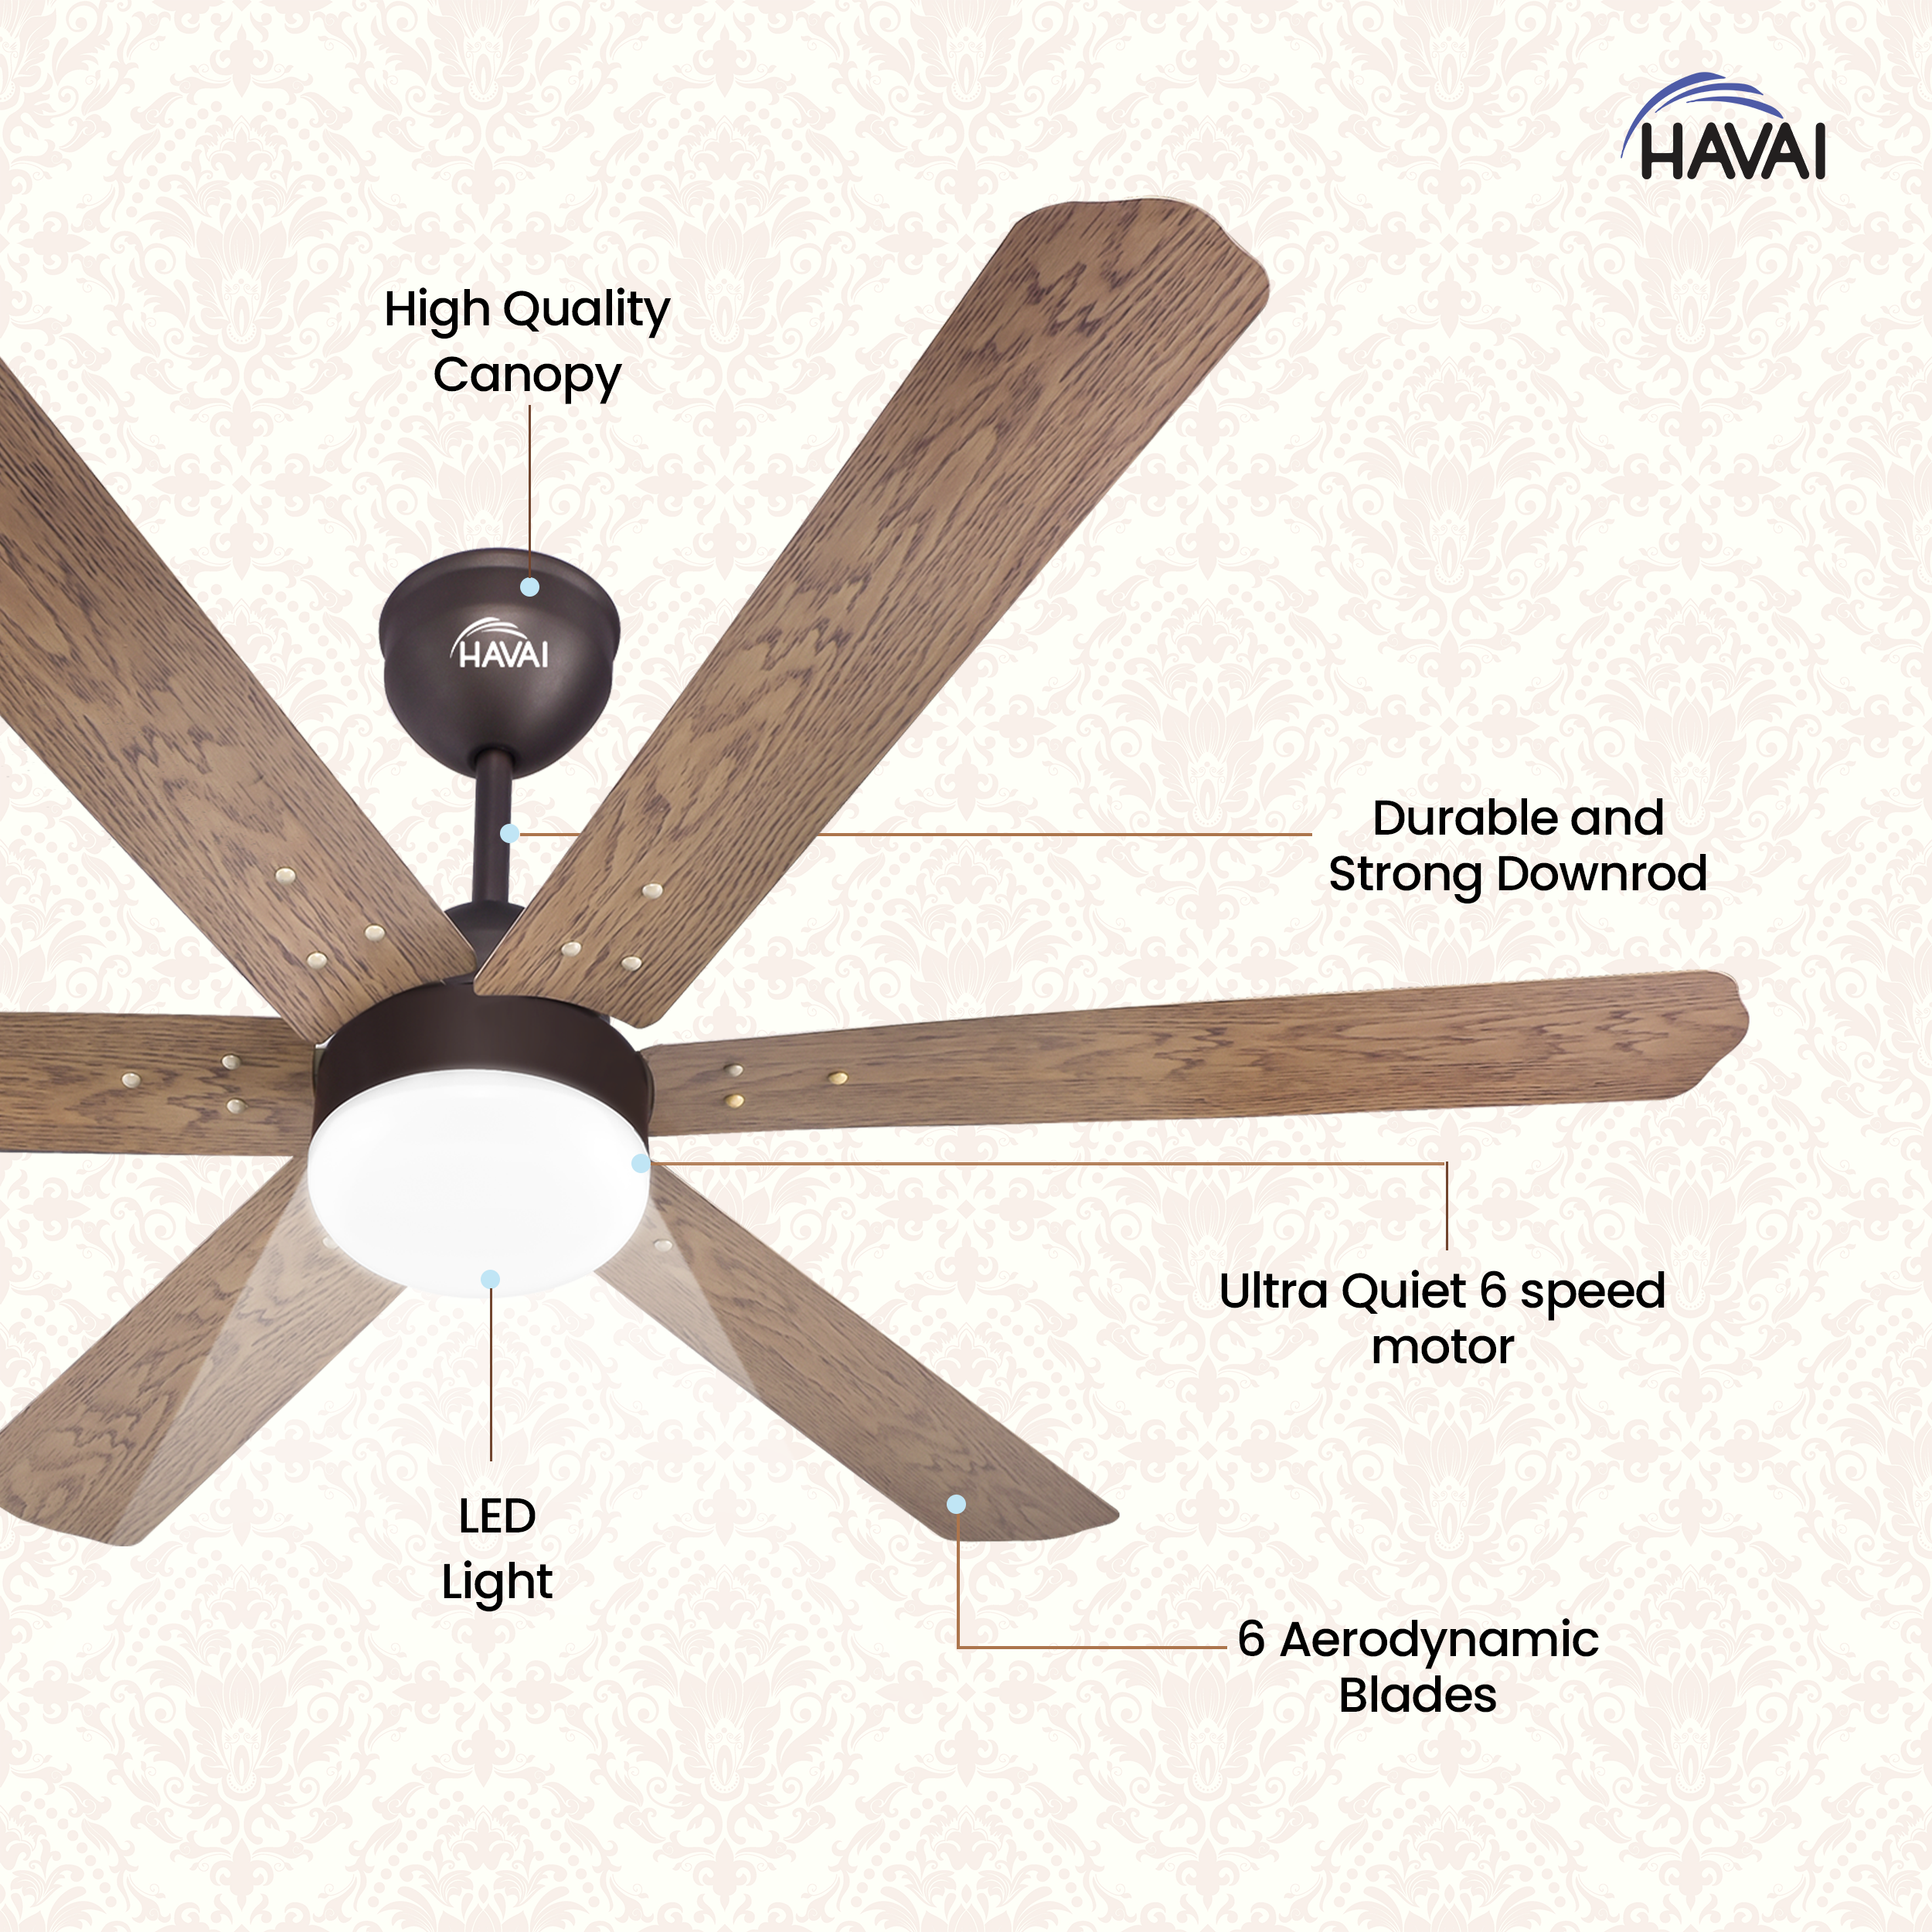 HAVAI Pristine Wooden Range BLDC Ceiling Fan - 6 Blades - 35W, Ashwood 1200mm Blade with Remote (WHITE 9W LED)…